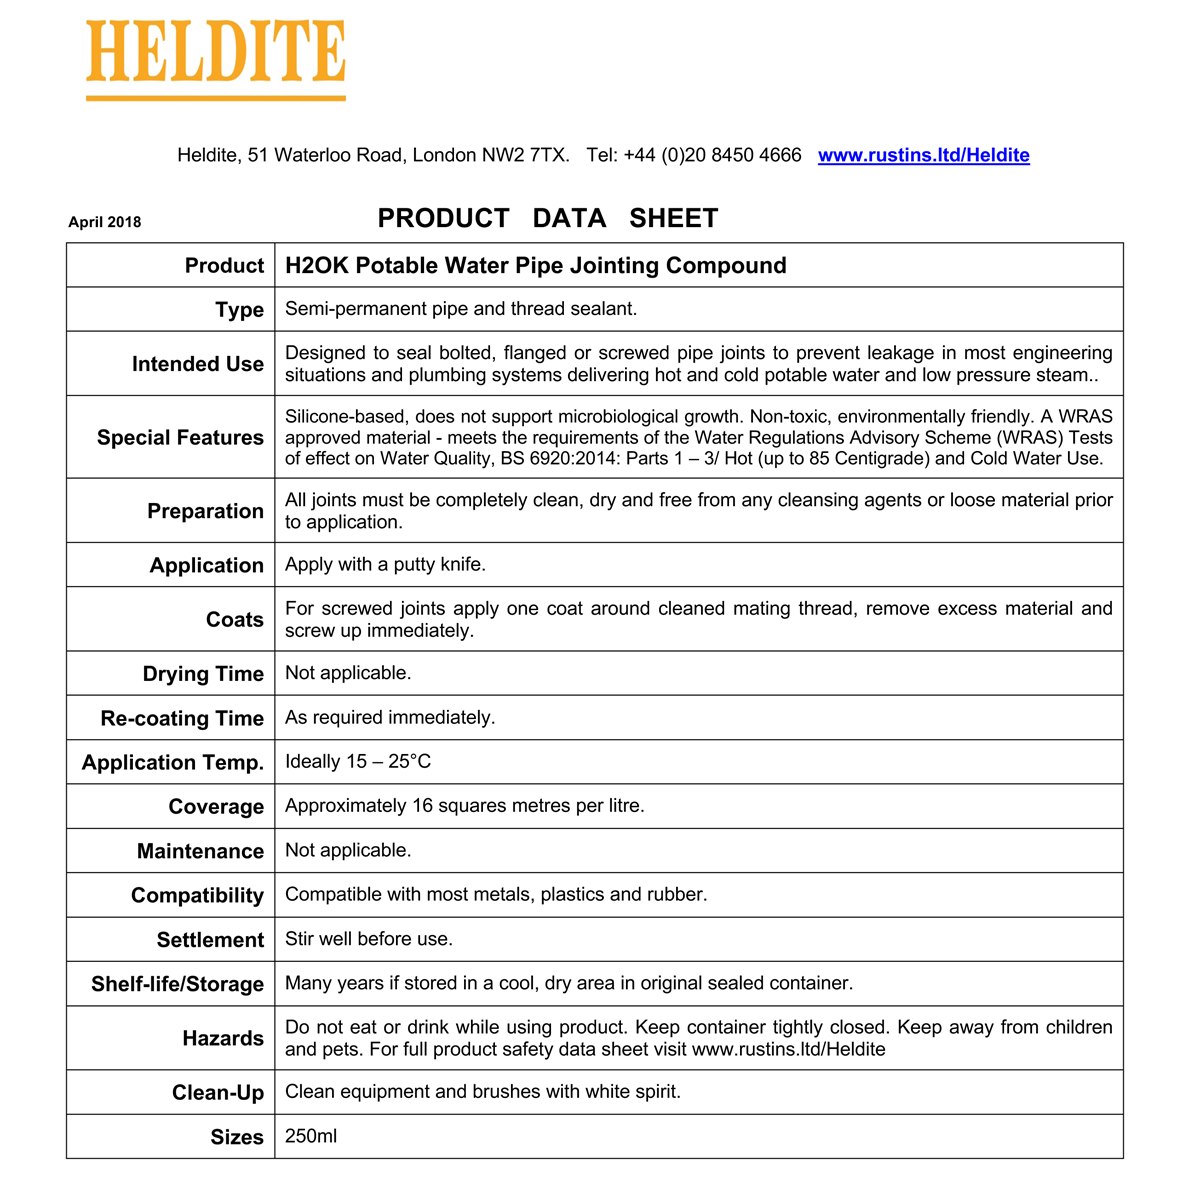 Heldite H2OK Jointing Compound Product Data Sheet